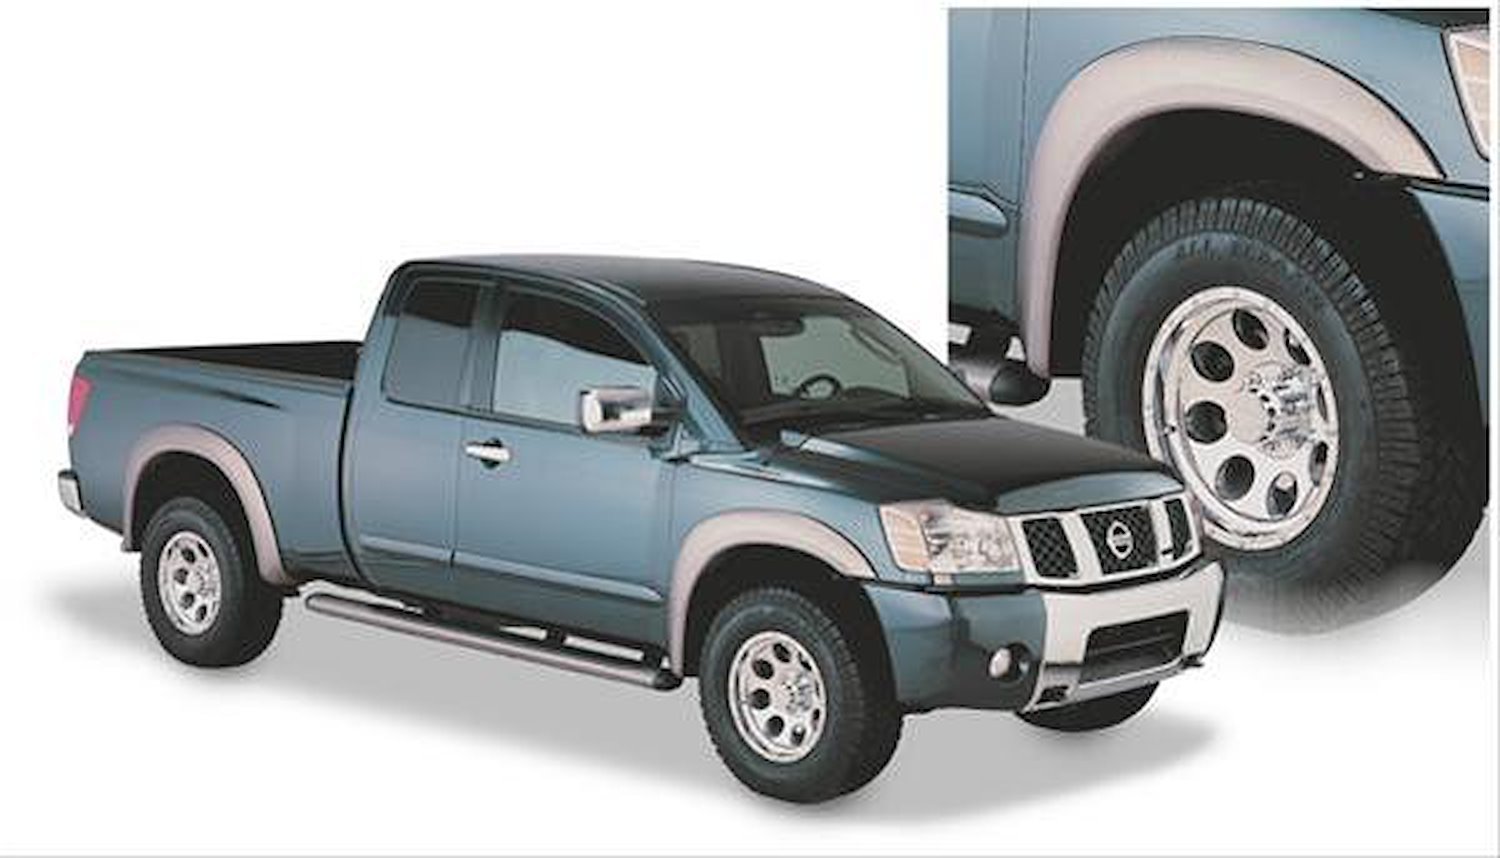 Extend-A-Fender Flares 2004-14 for Nissan Titan (With Bedside Lockbox)